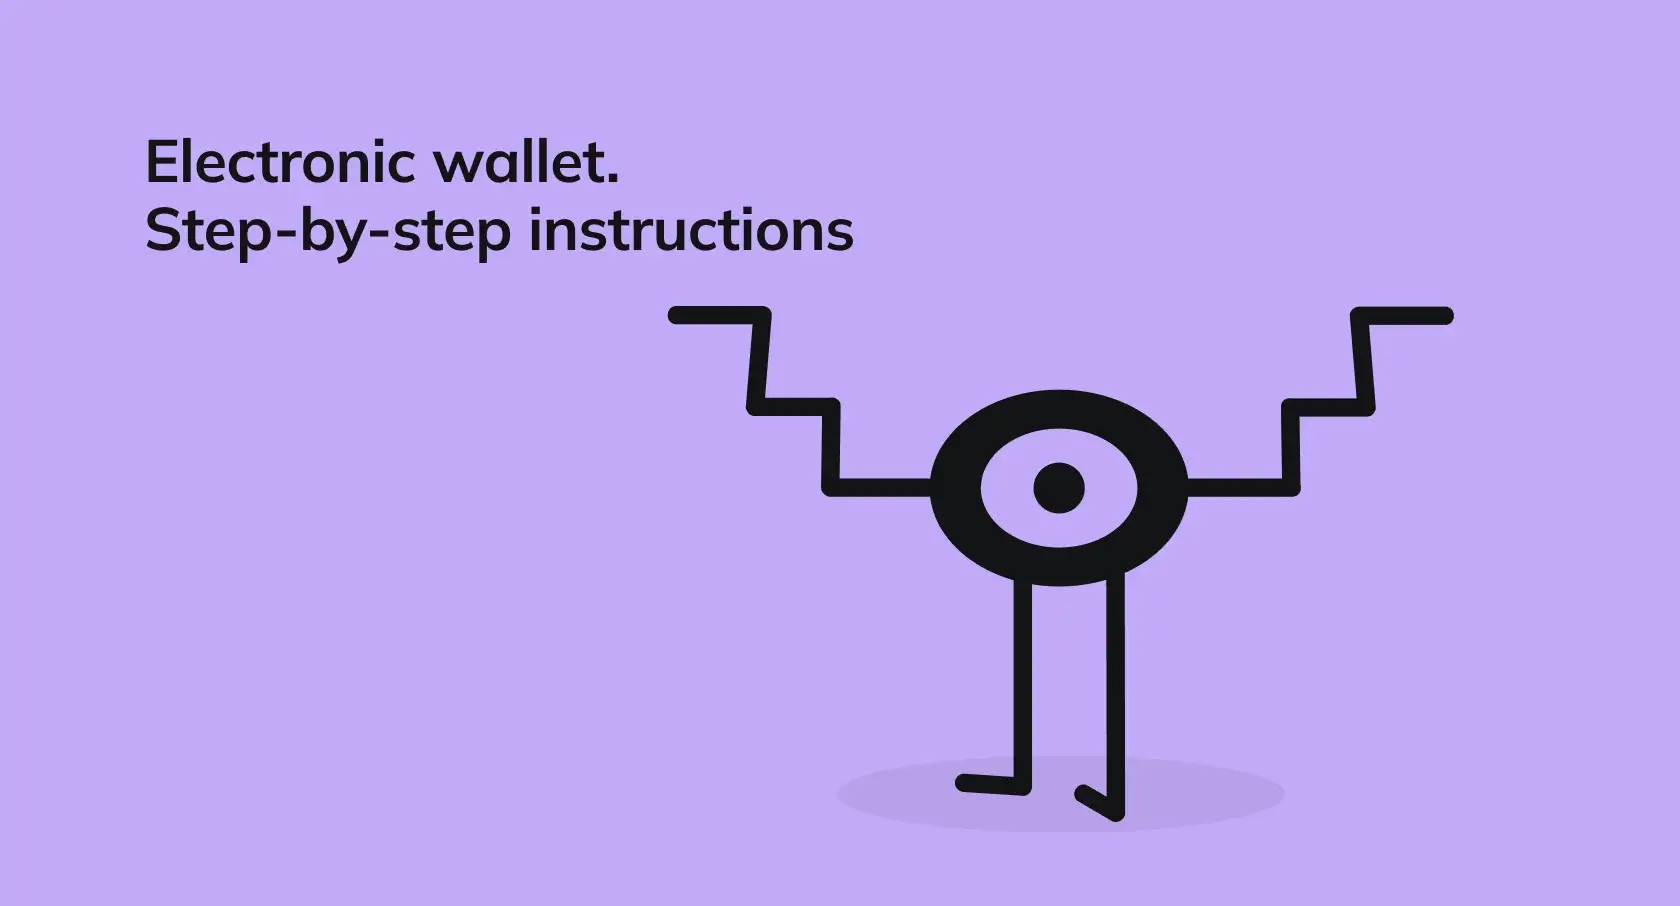 How to Get and Use an Electronic Wallet?